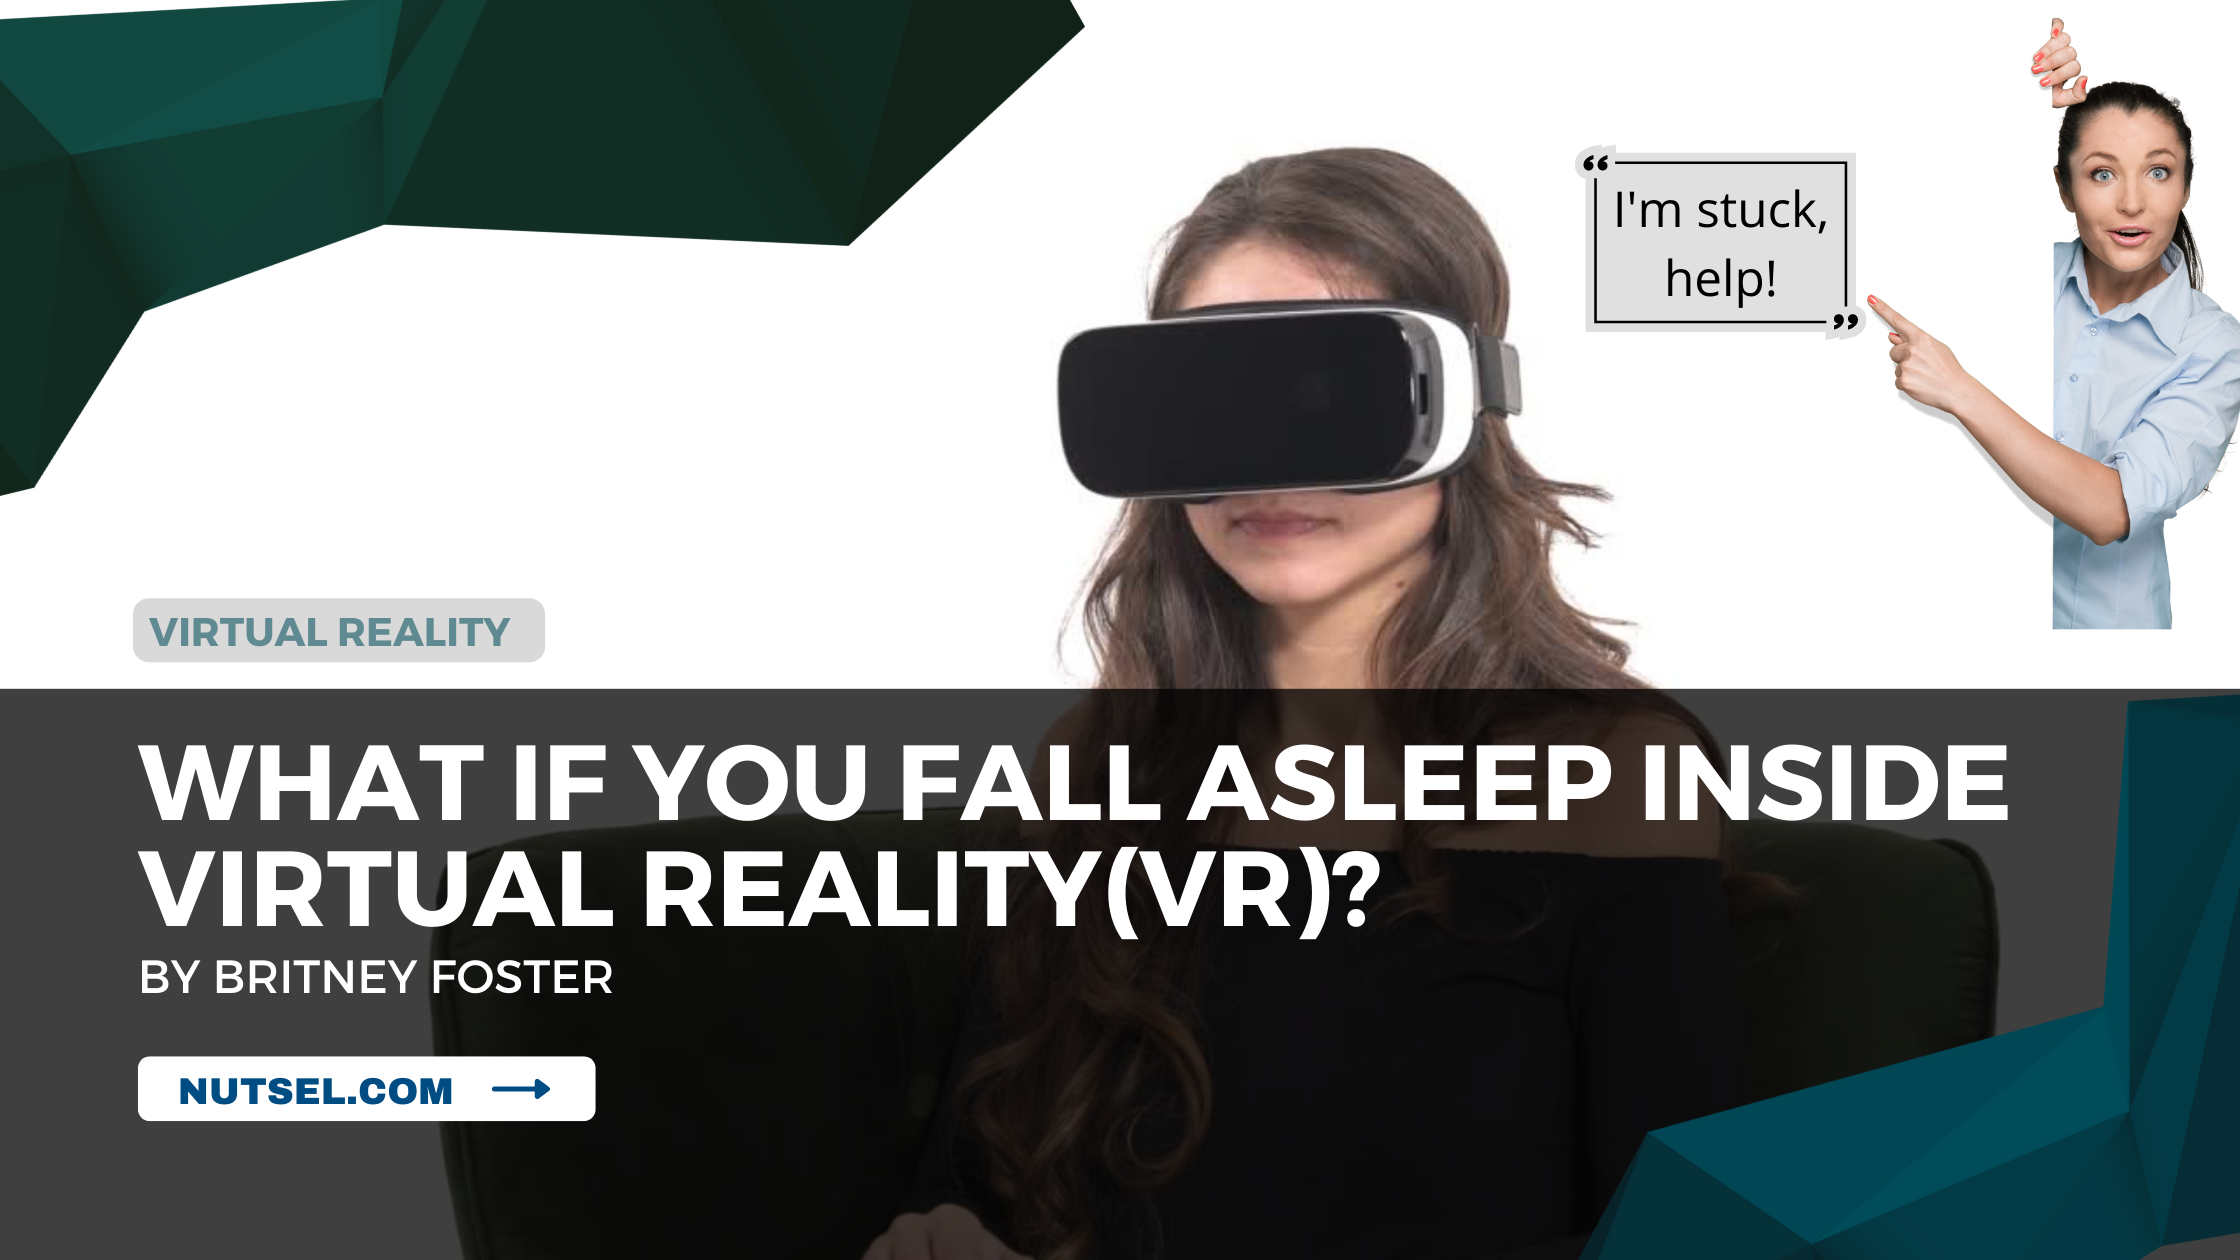 What if you fall asleep inside Virtual Reality(VR)?